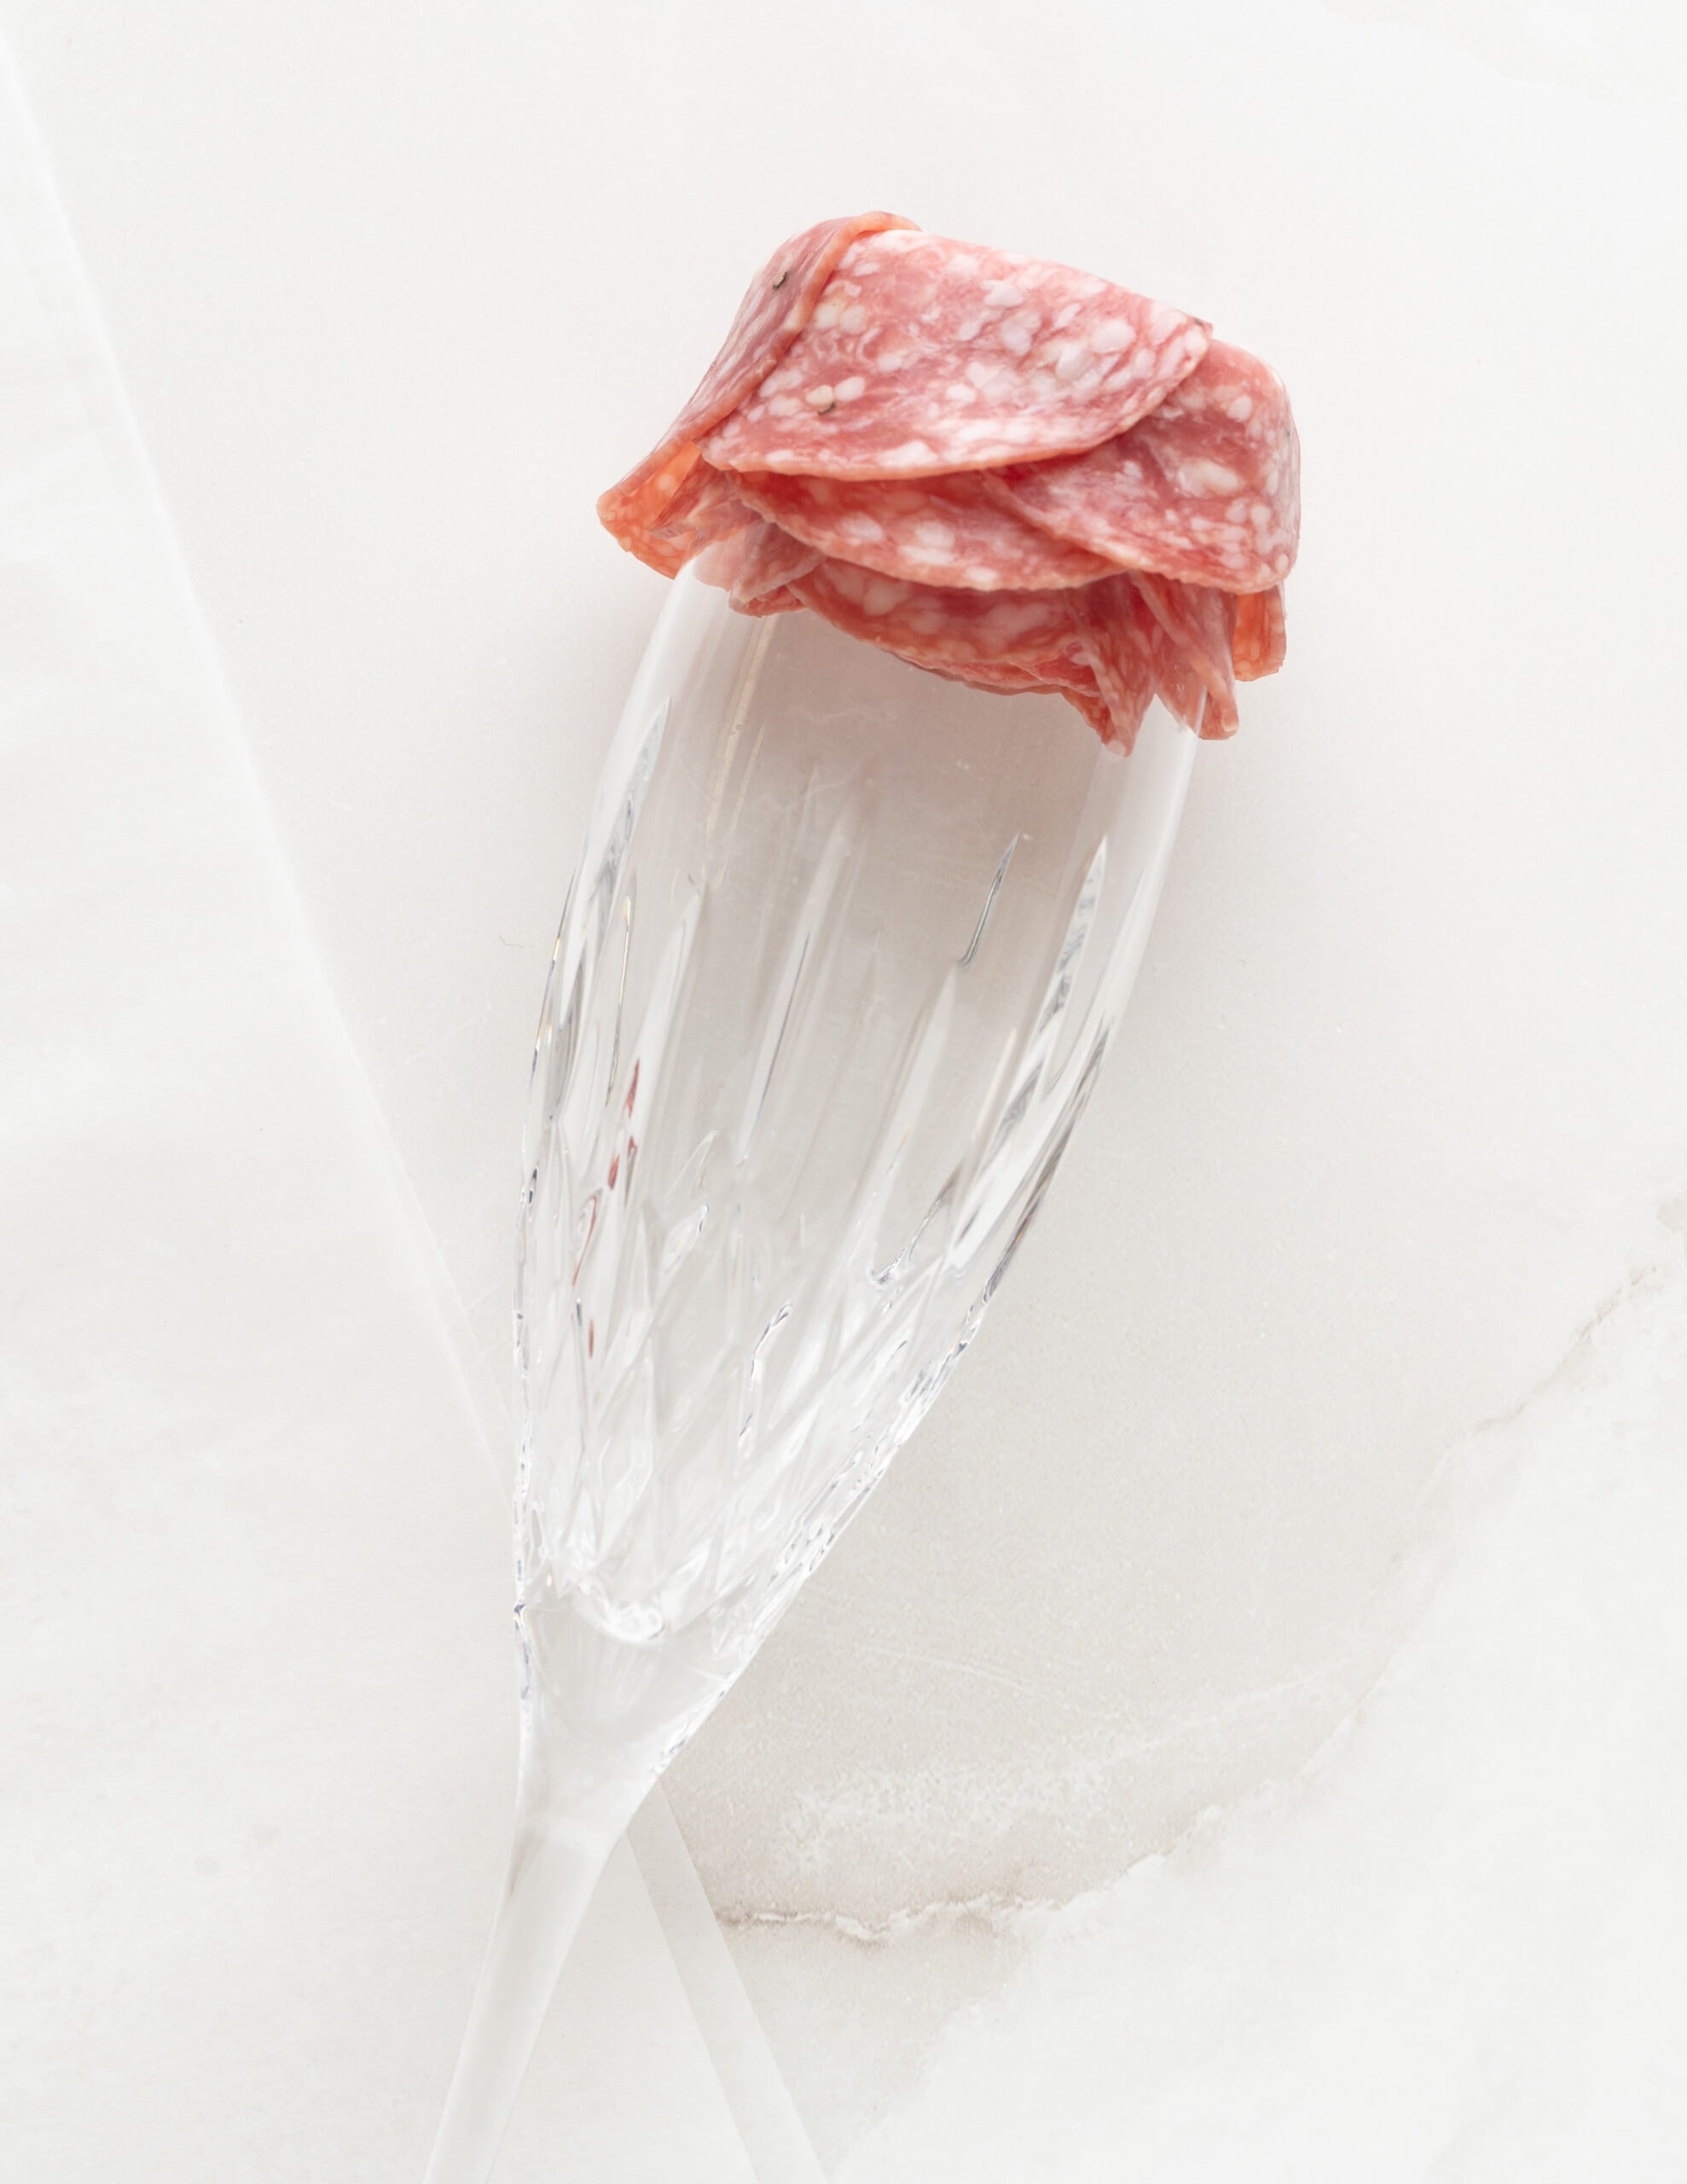 A champagne flute with several layers  of salami on the rim of the glass, layering on top of one another.